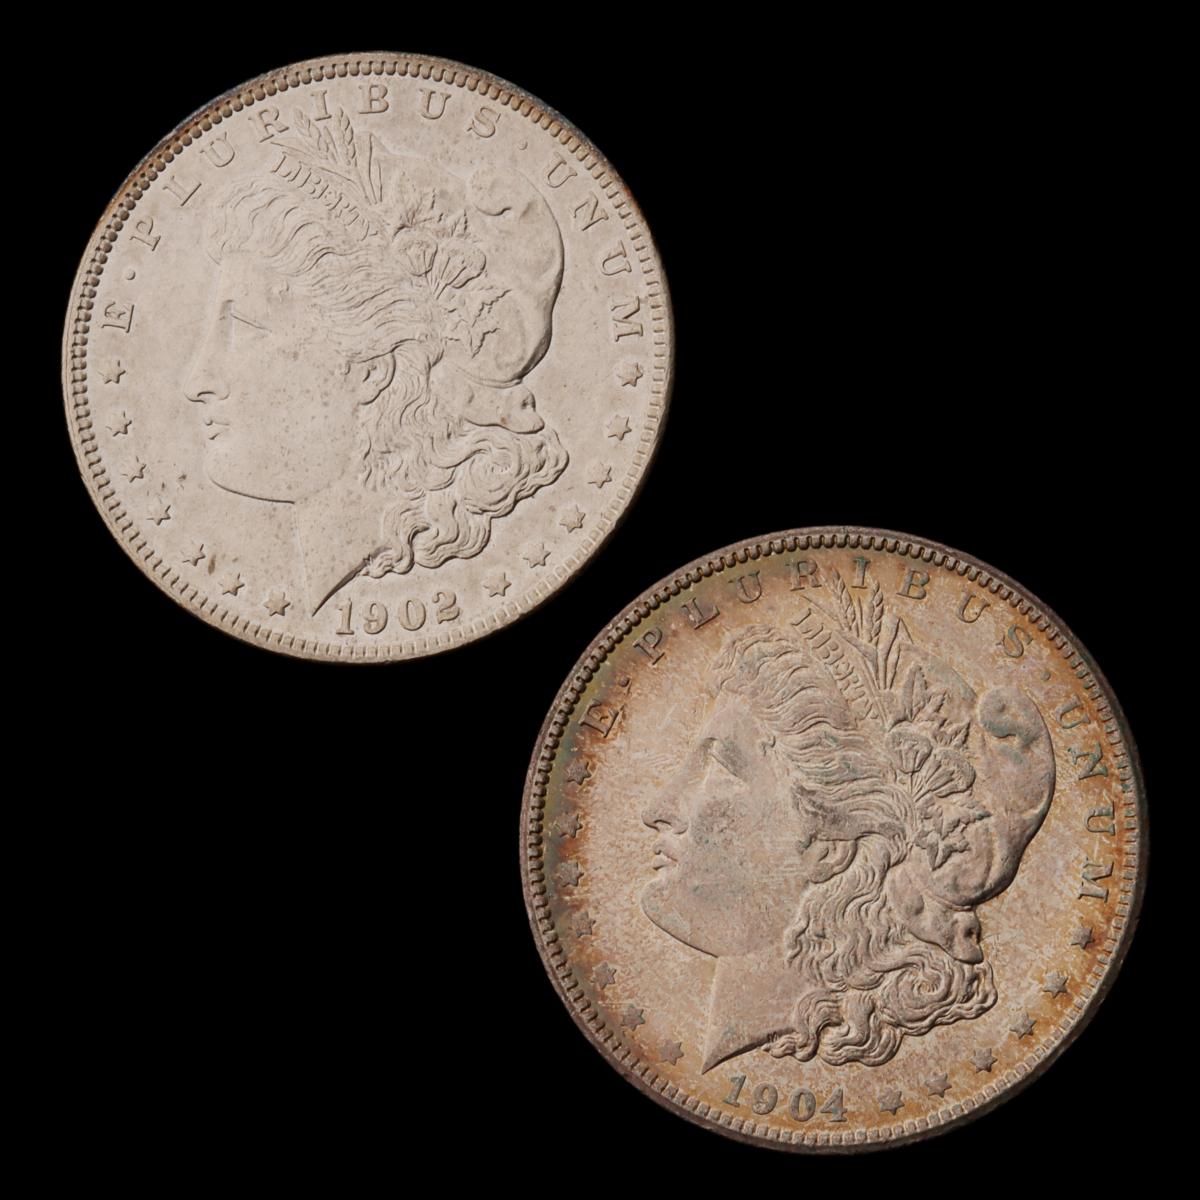 TWO HIGHER GRADE MORGAN SILVER DOLLARS, 1902 AND 1904-O